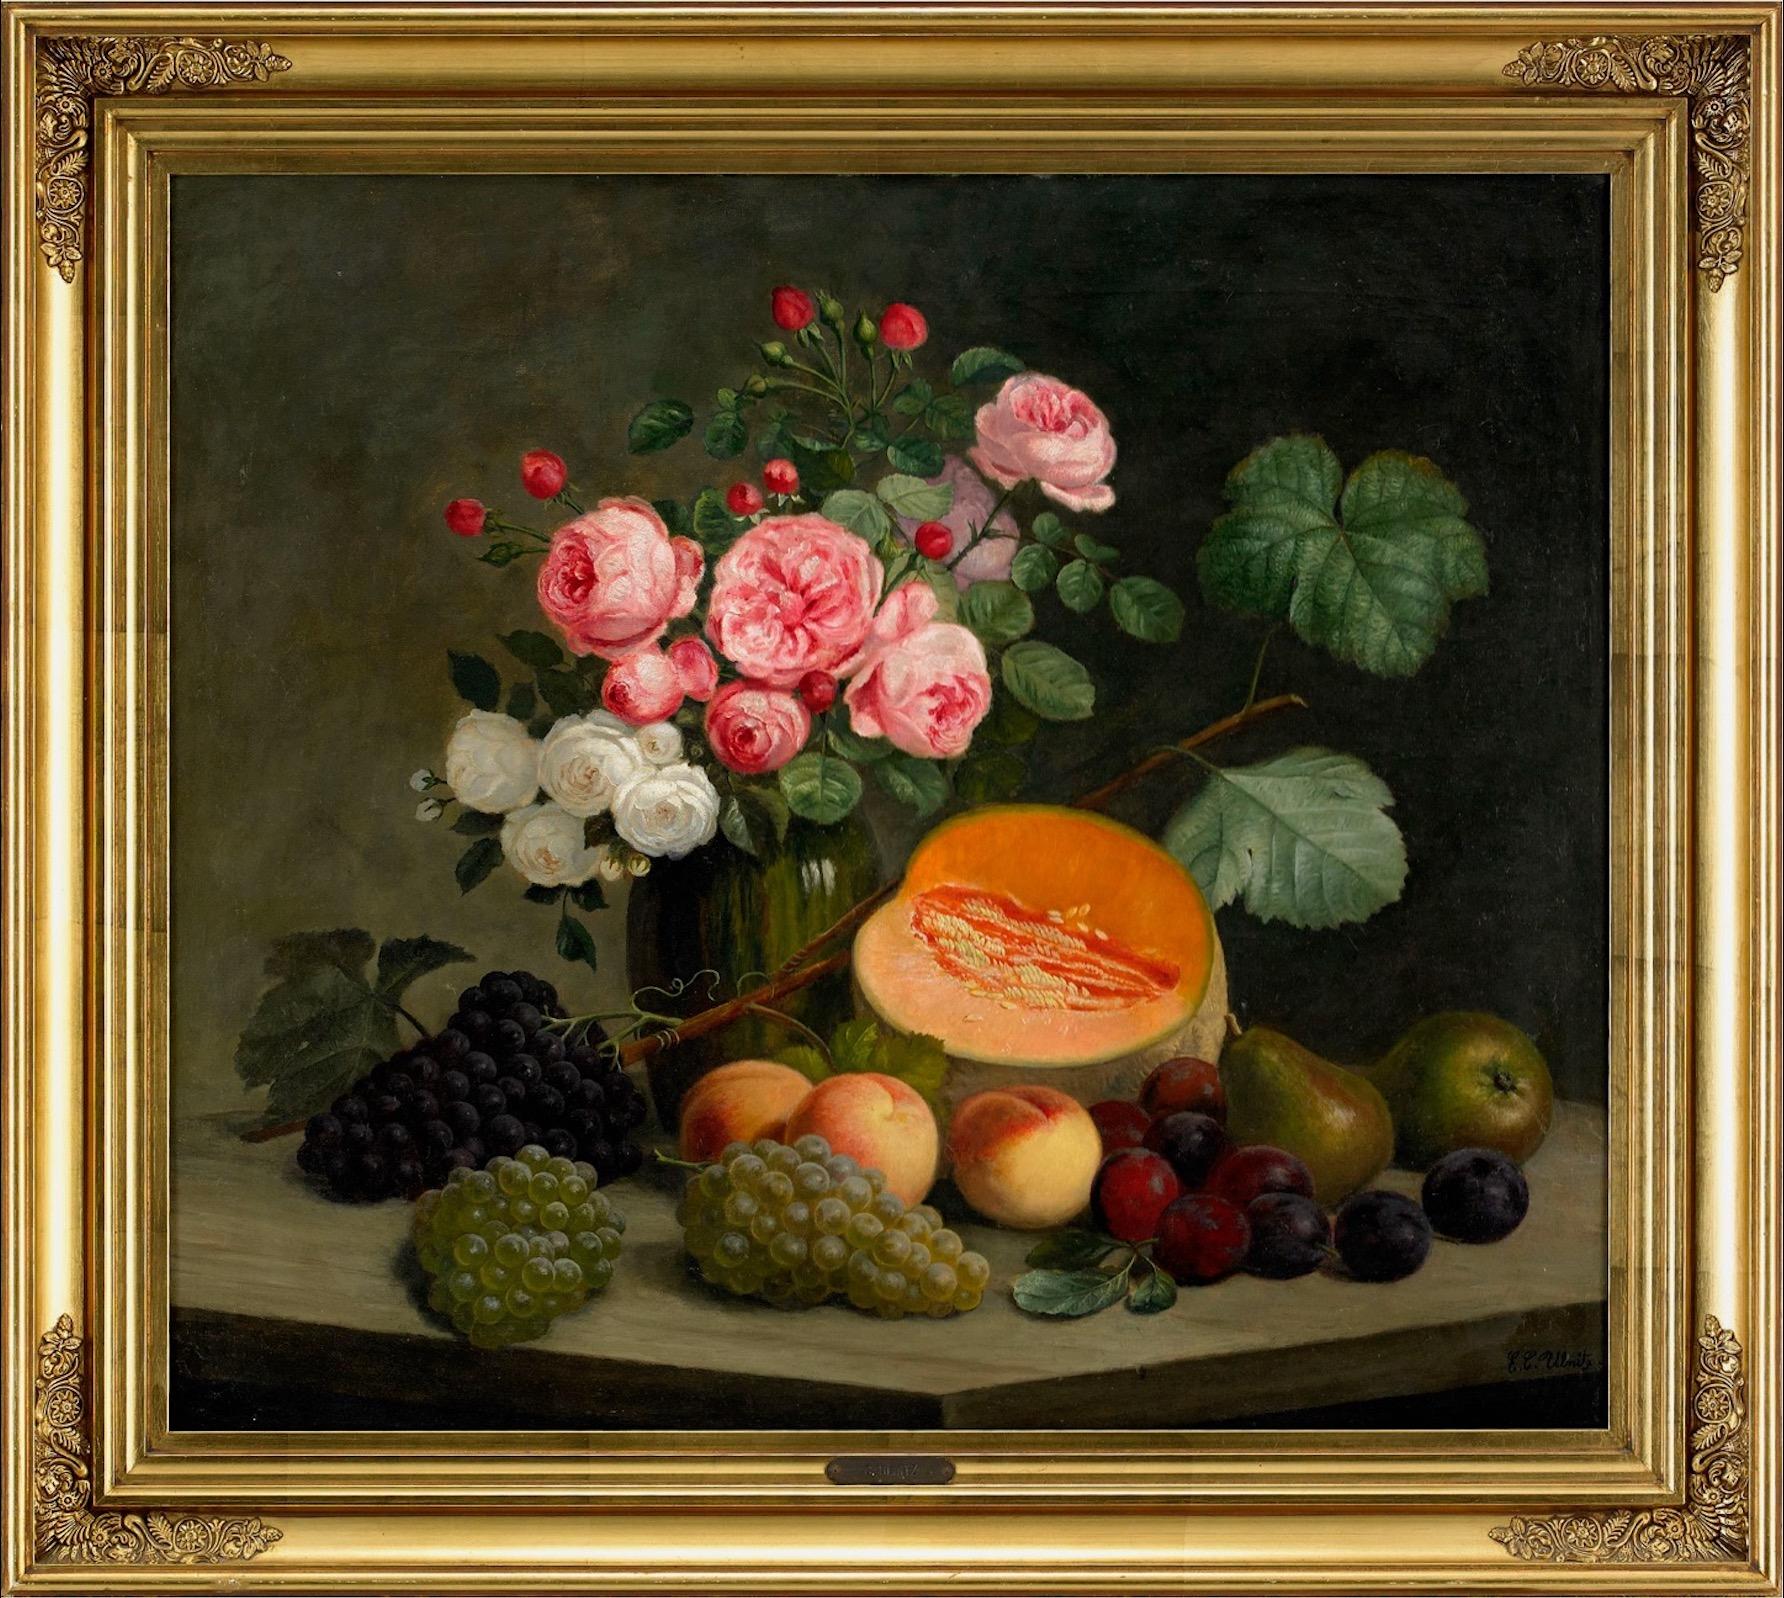 A still life with fruits and roses painted by the danish painter Emil C. Ulnitz (1856-1933) A fine examples of the Danish still life painting of the 19th century. The painting is in good condition and has its original frame. Measurements of the